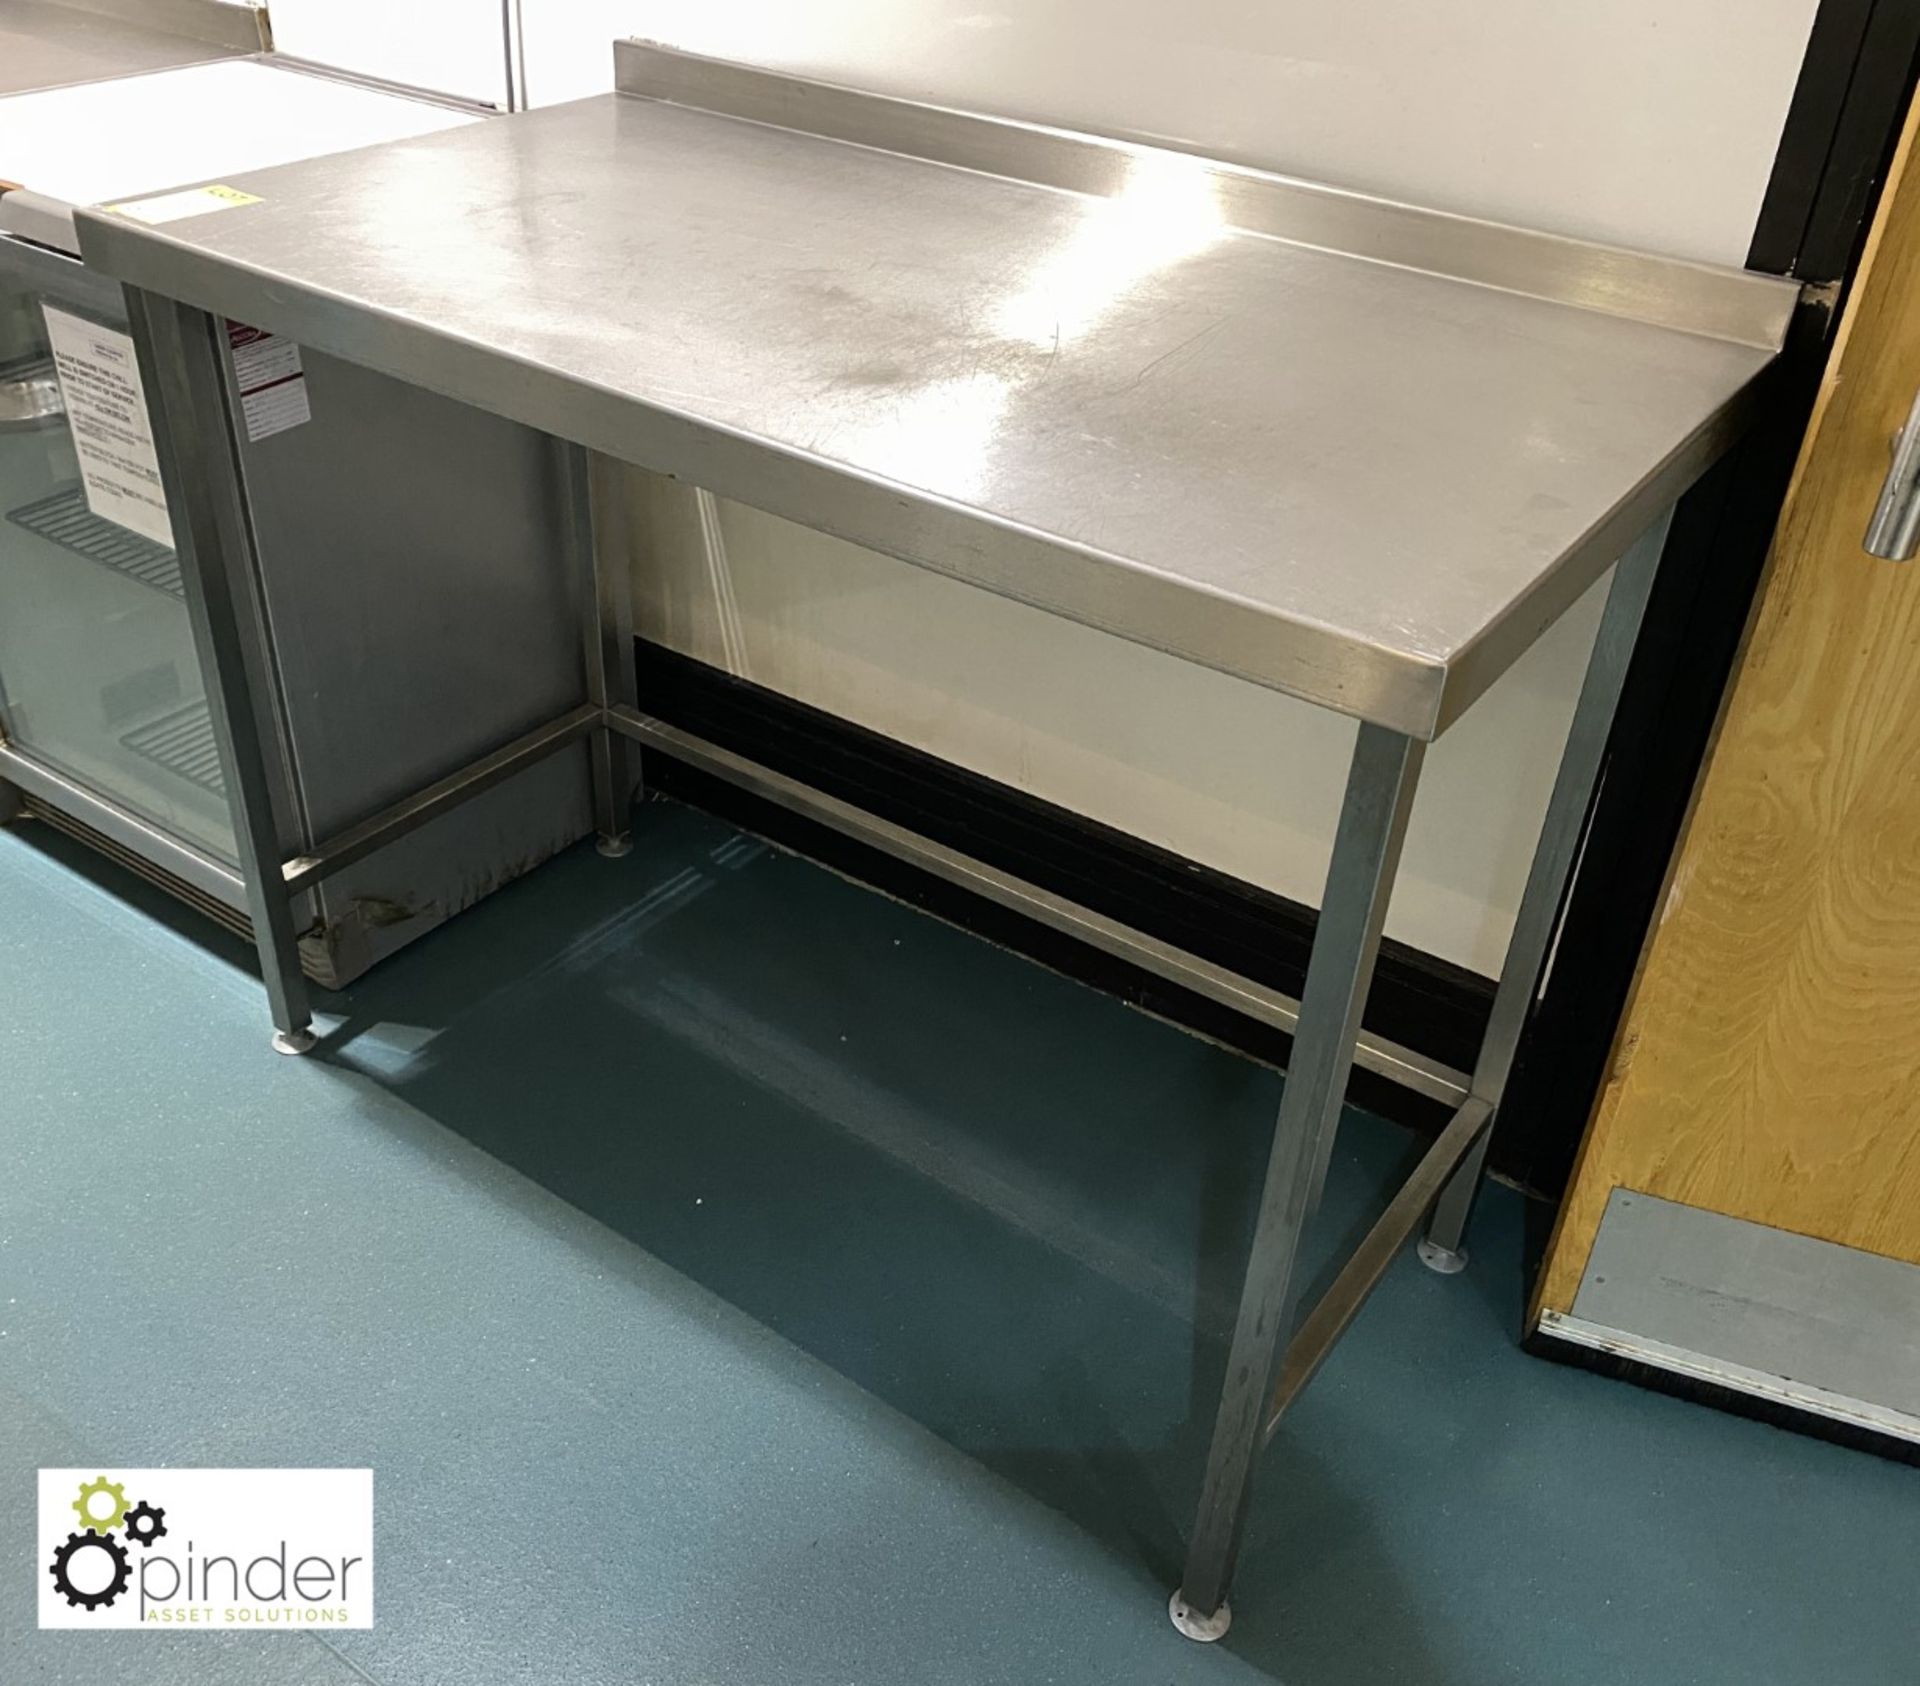 Stainless steel Preparation Table, 1200mm x 650mm, with raised rear lip (located in Canteen